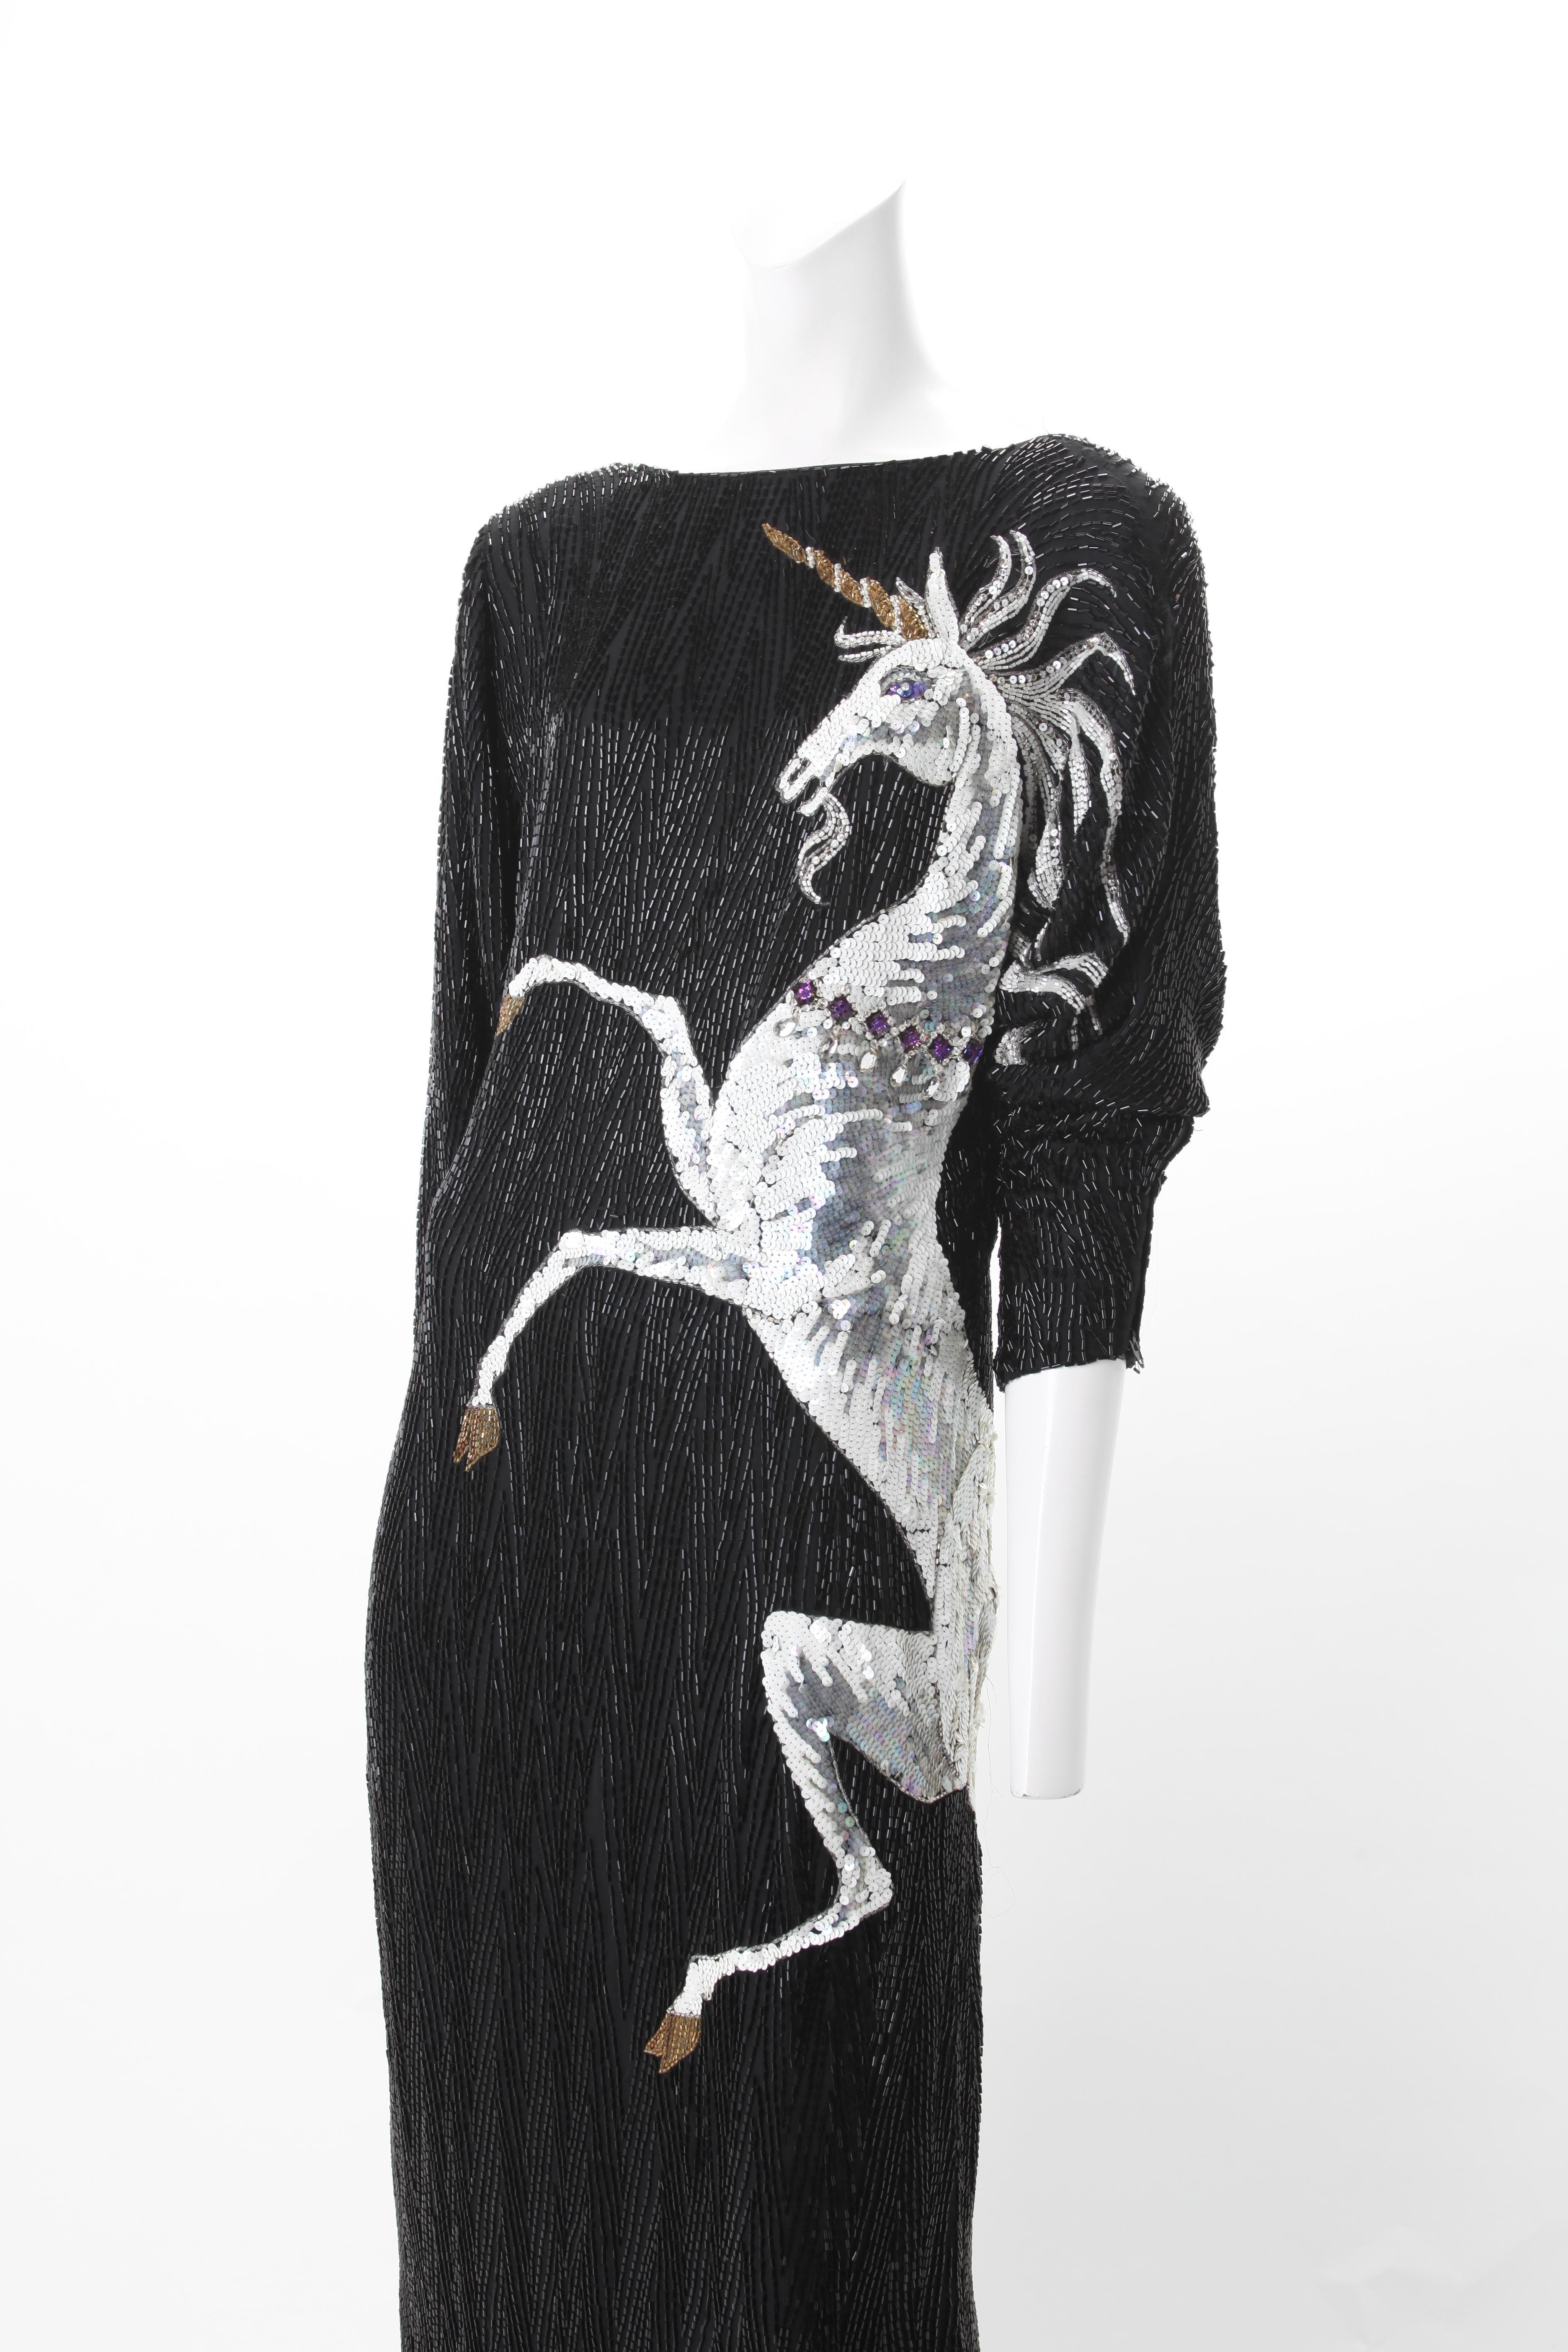 Bob Mackie Vintage Couture Black Silk Beaded Gown with Unicorn motif. c.1980s.
Boat neck gown with hand-sewn black beading throughout the entire dress. Silver and white Unicorn motif aligning the dress's left bodice continuing through to the back